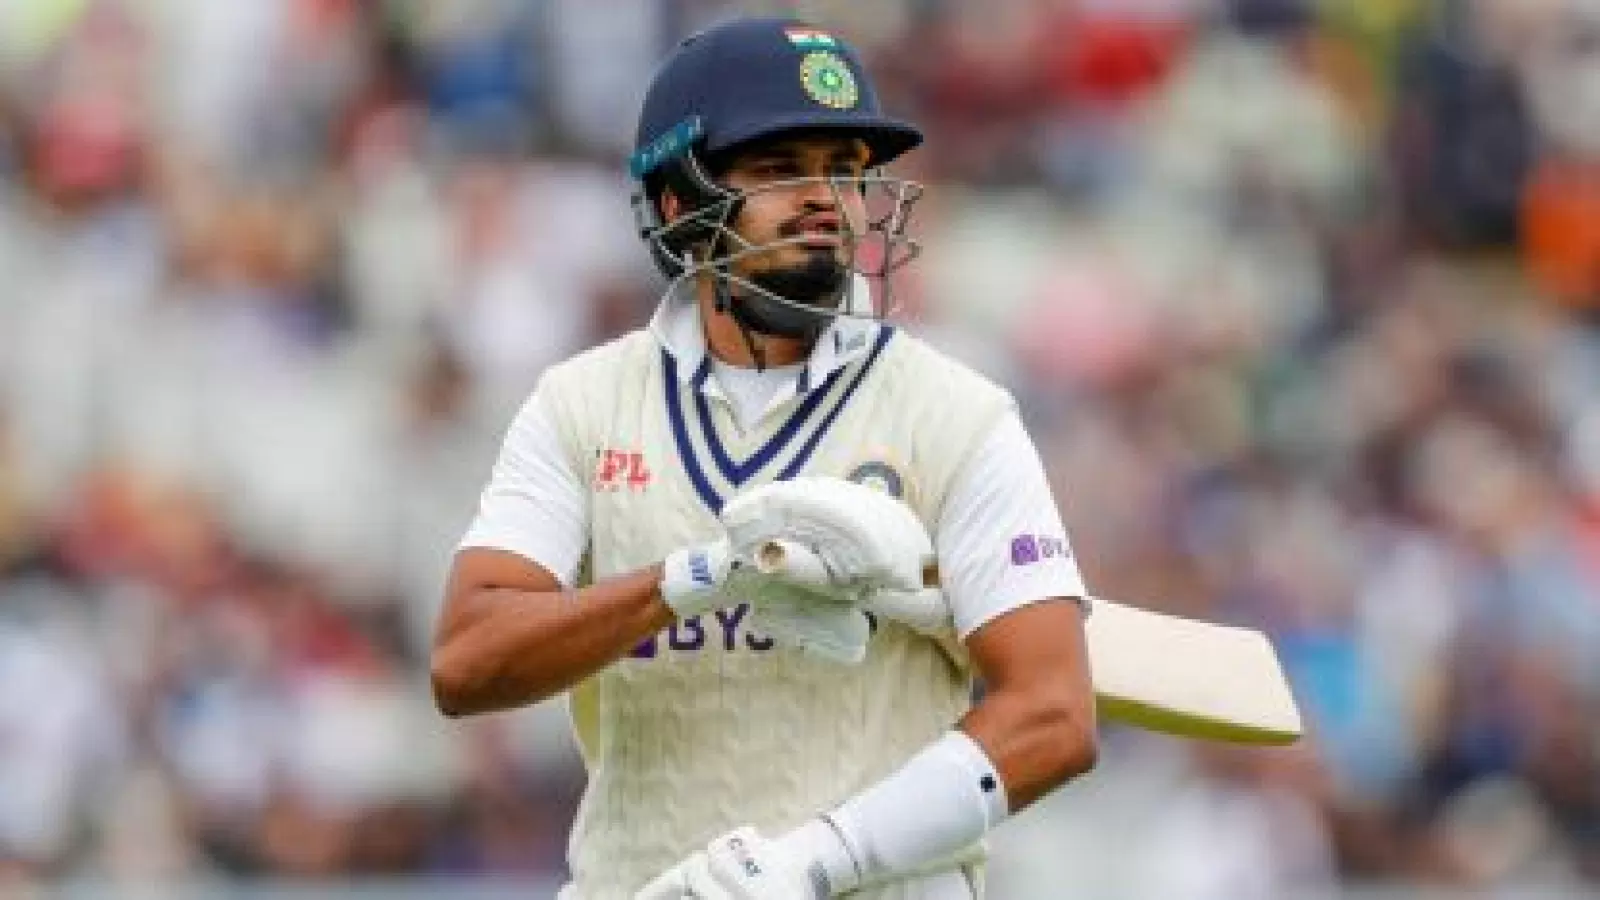 IND vs ENG: Shreyas Iyer failed again, not a single half-century in 12 innings, fans said - he will replace Rahane